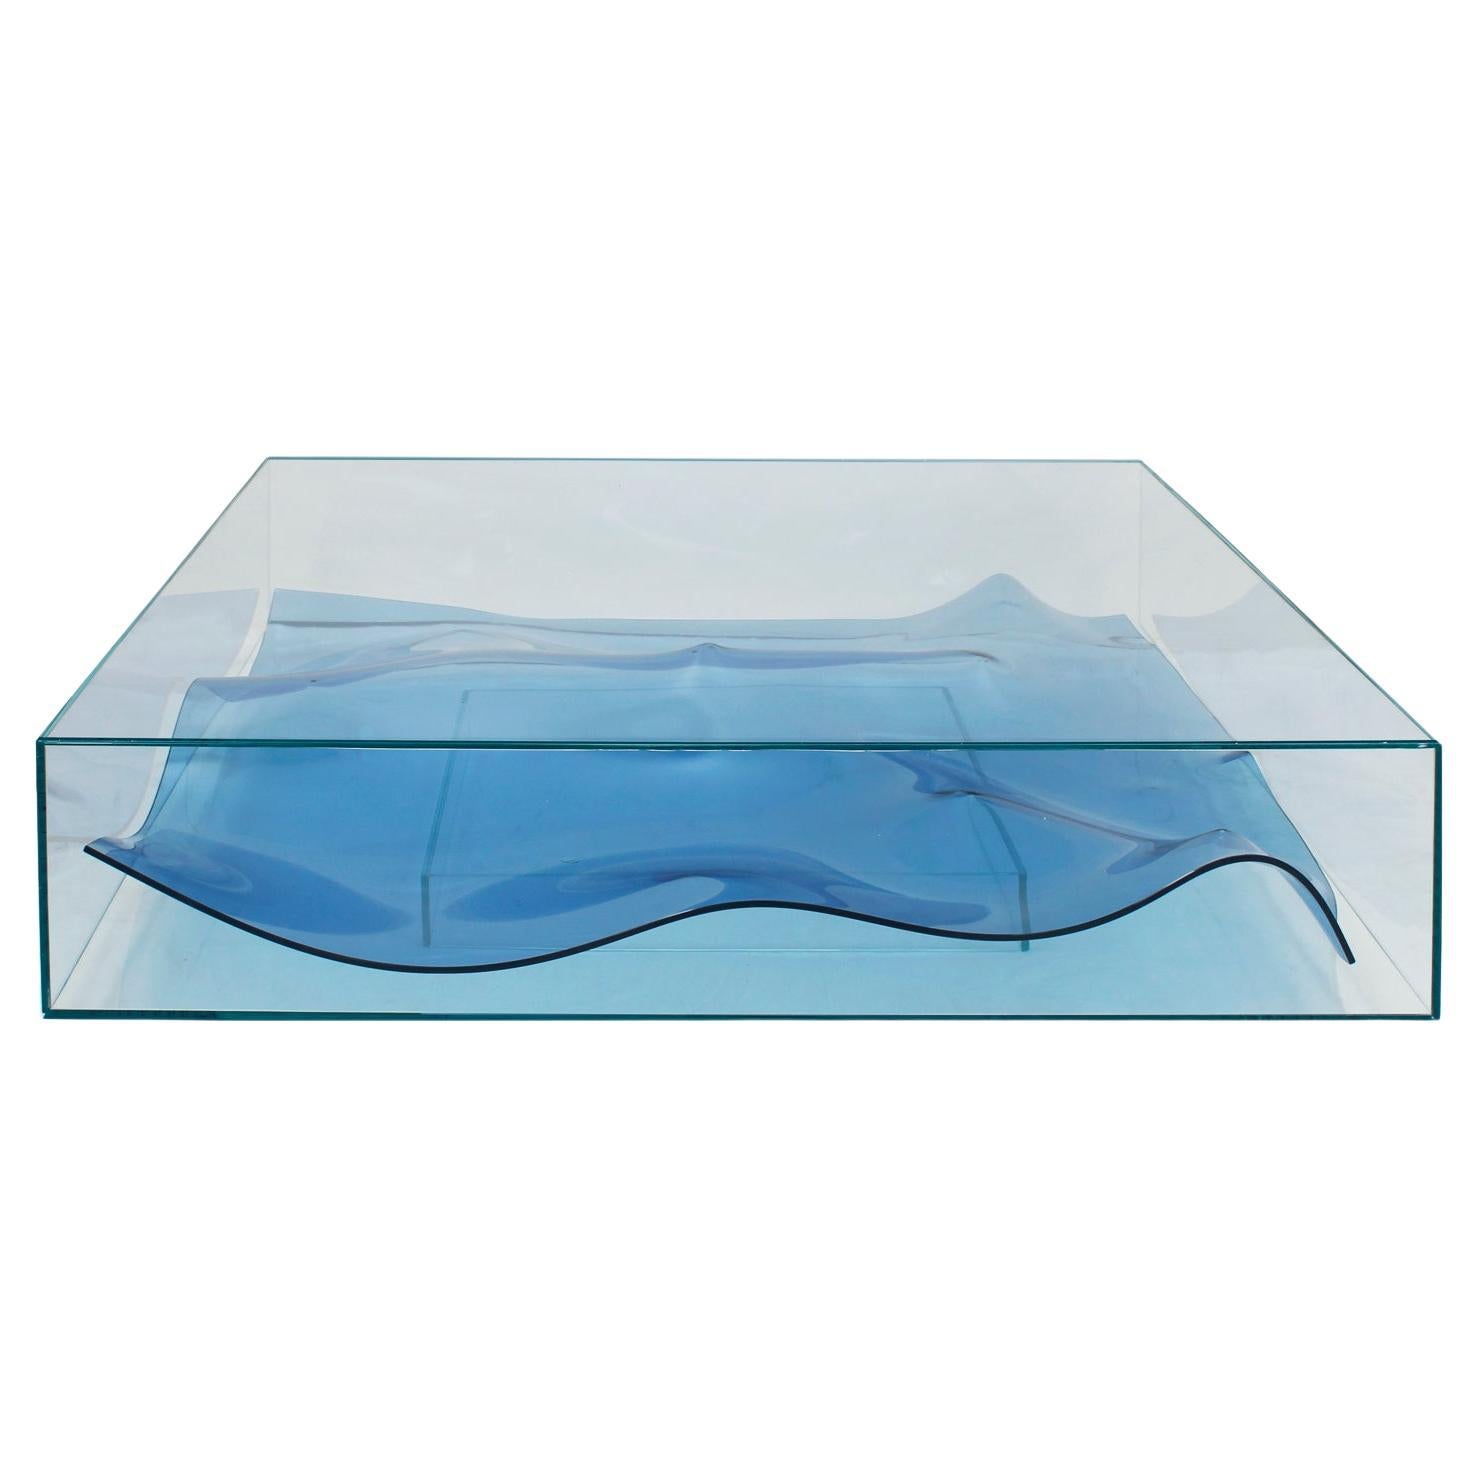 Coffee Table Designed by L.A. Studio with Blue Murano Glass Inside